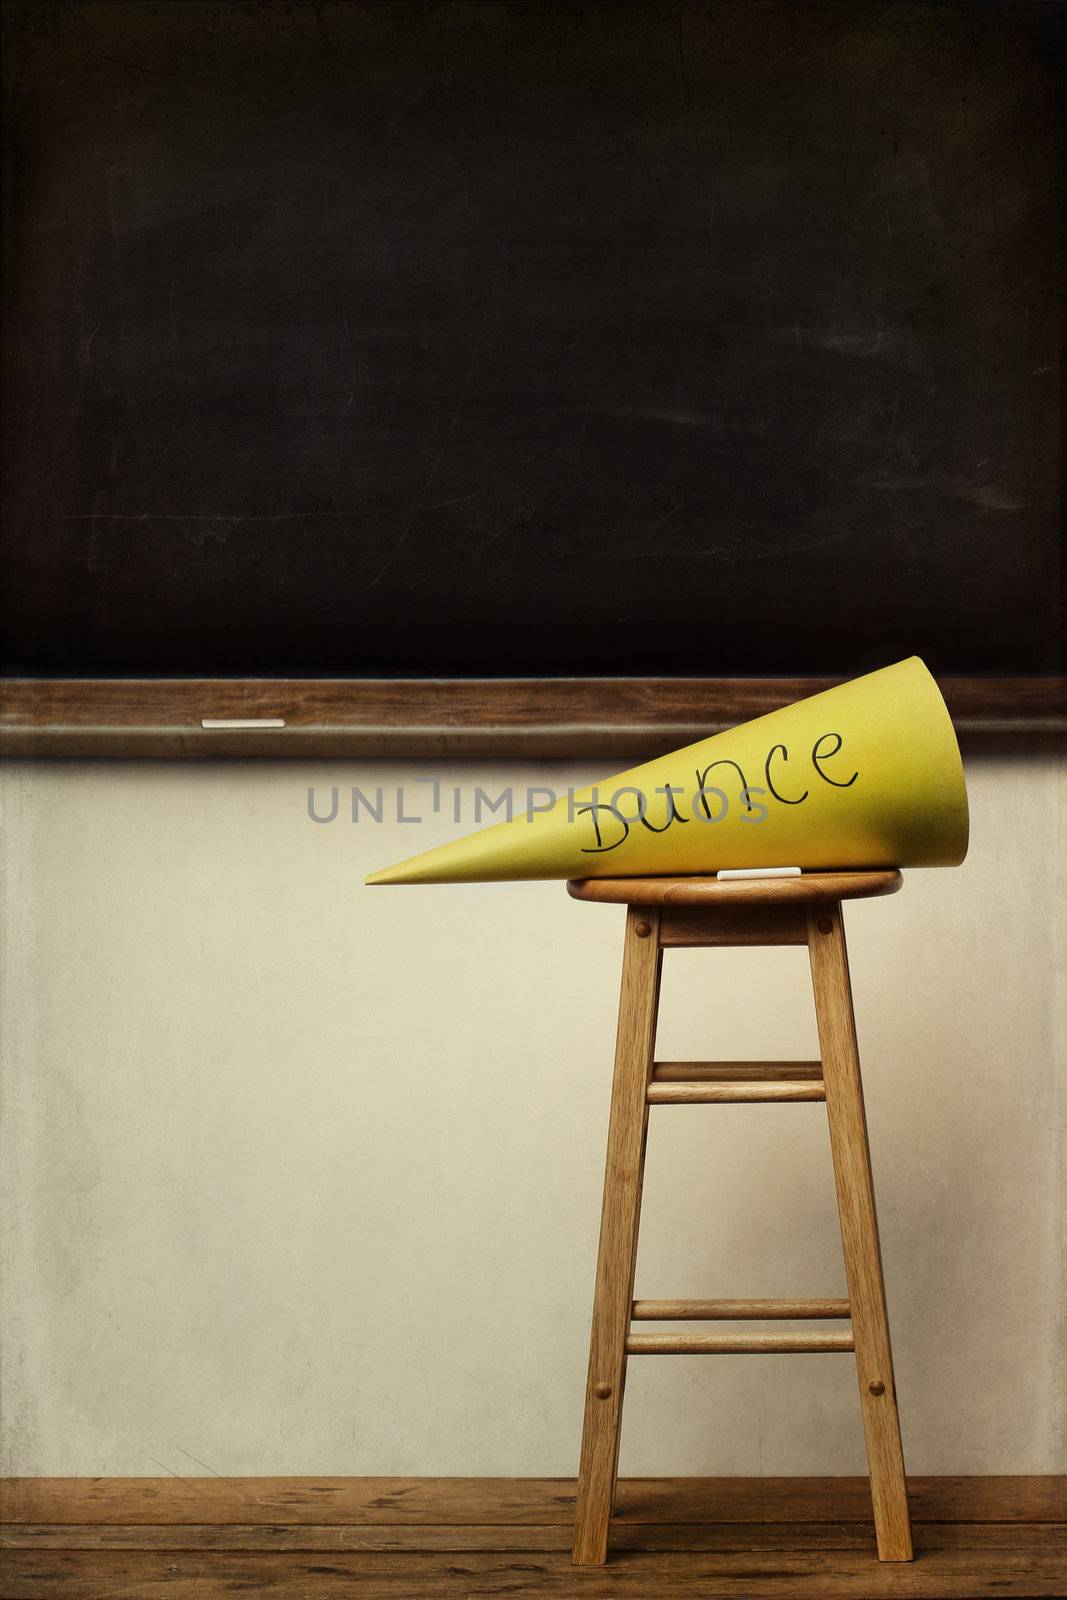 Yellow dunce hat on stool with chalkboard by Sandralise